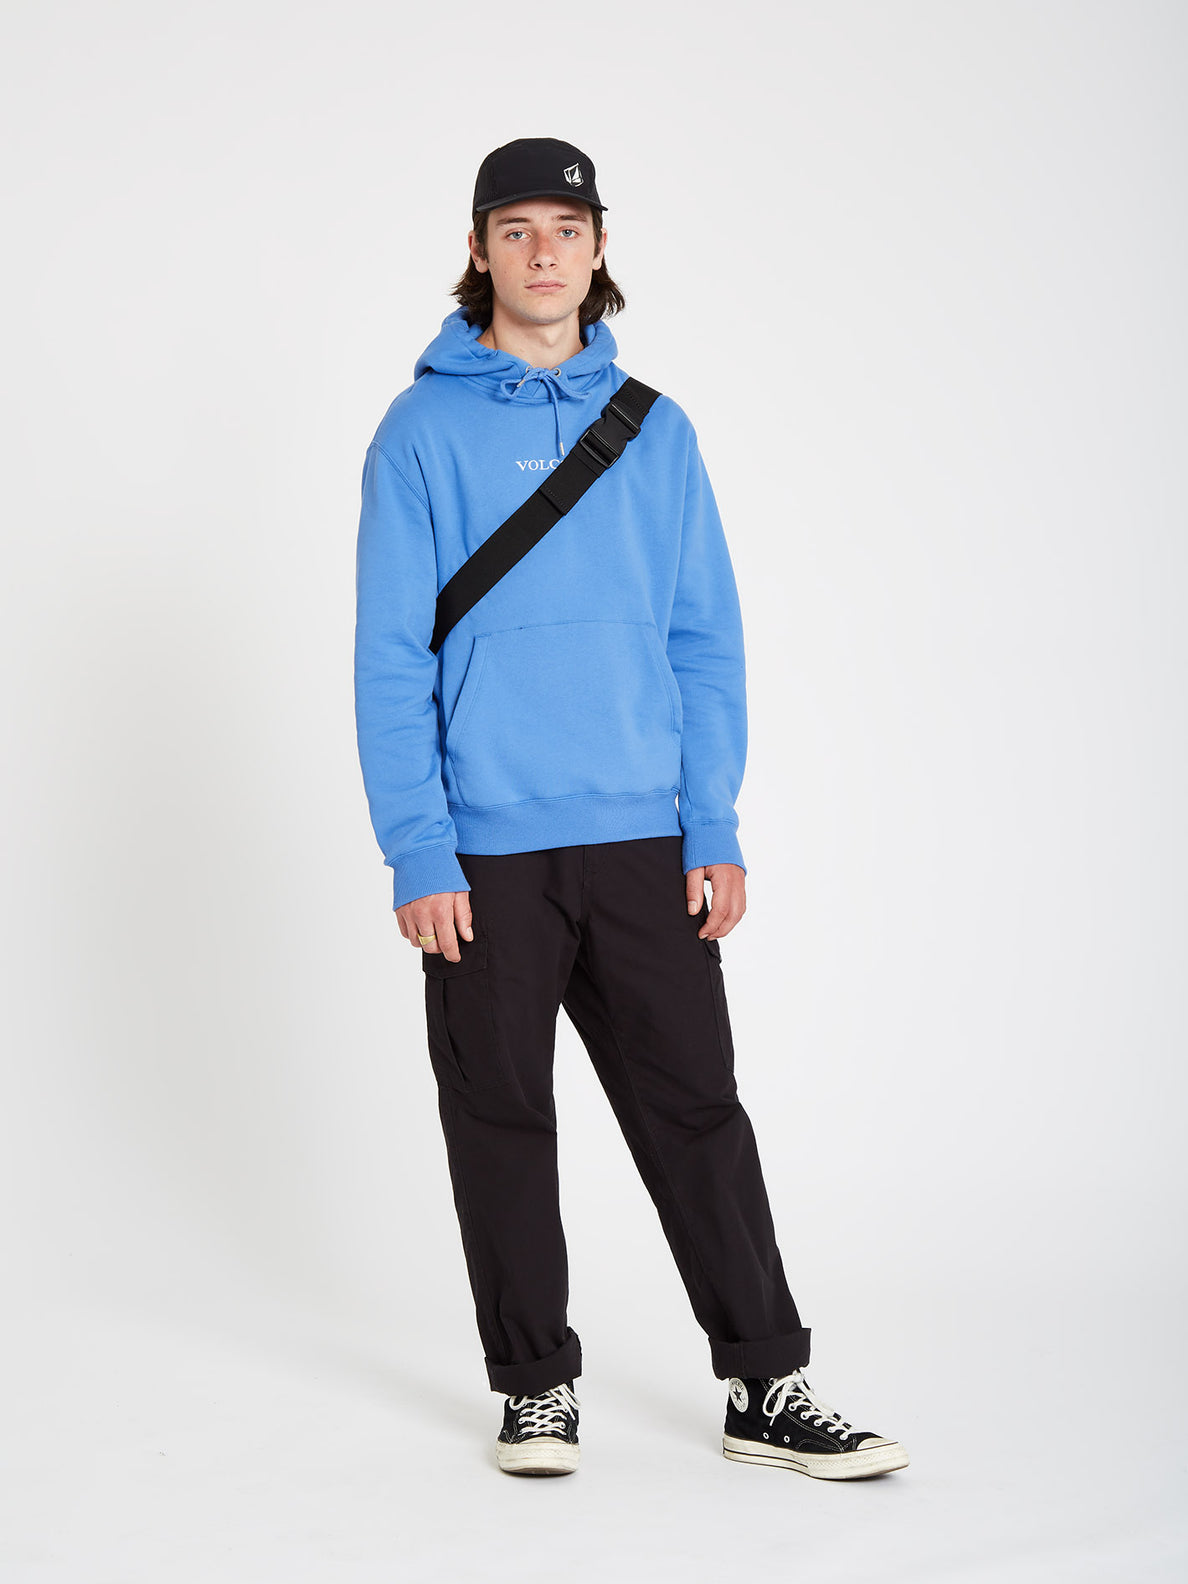 Miter Iii Cargo Pant Black (A1112105_BLK) [21]